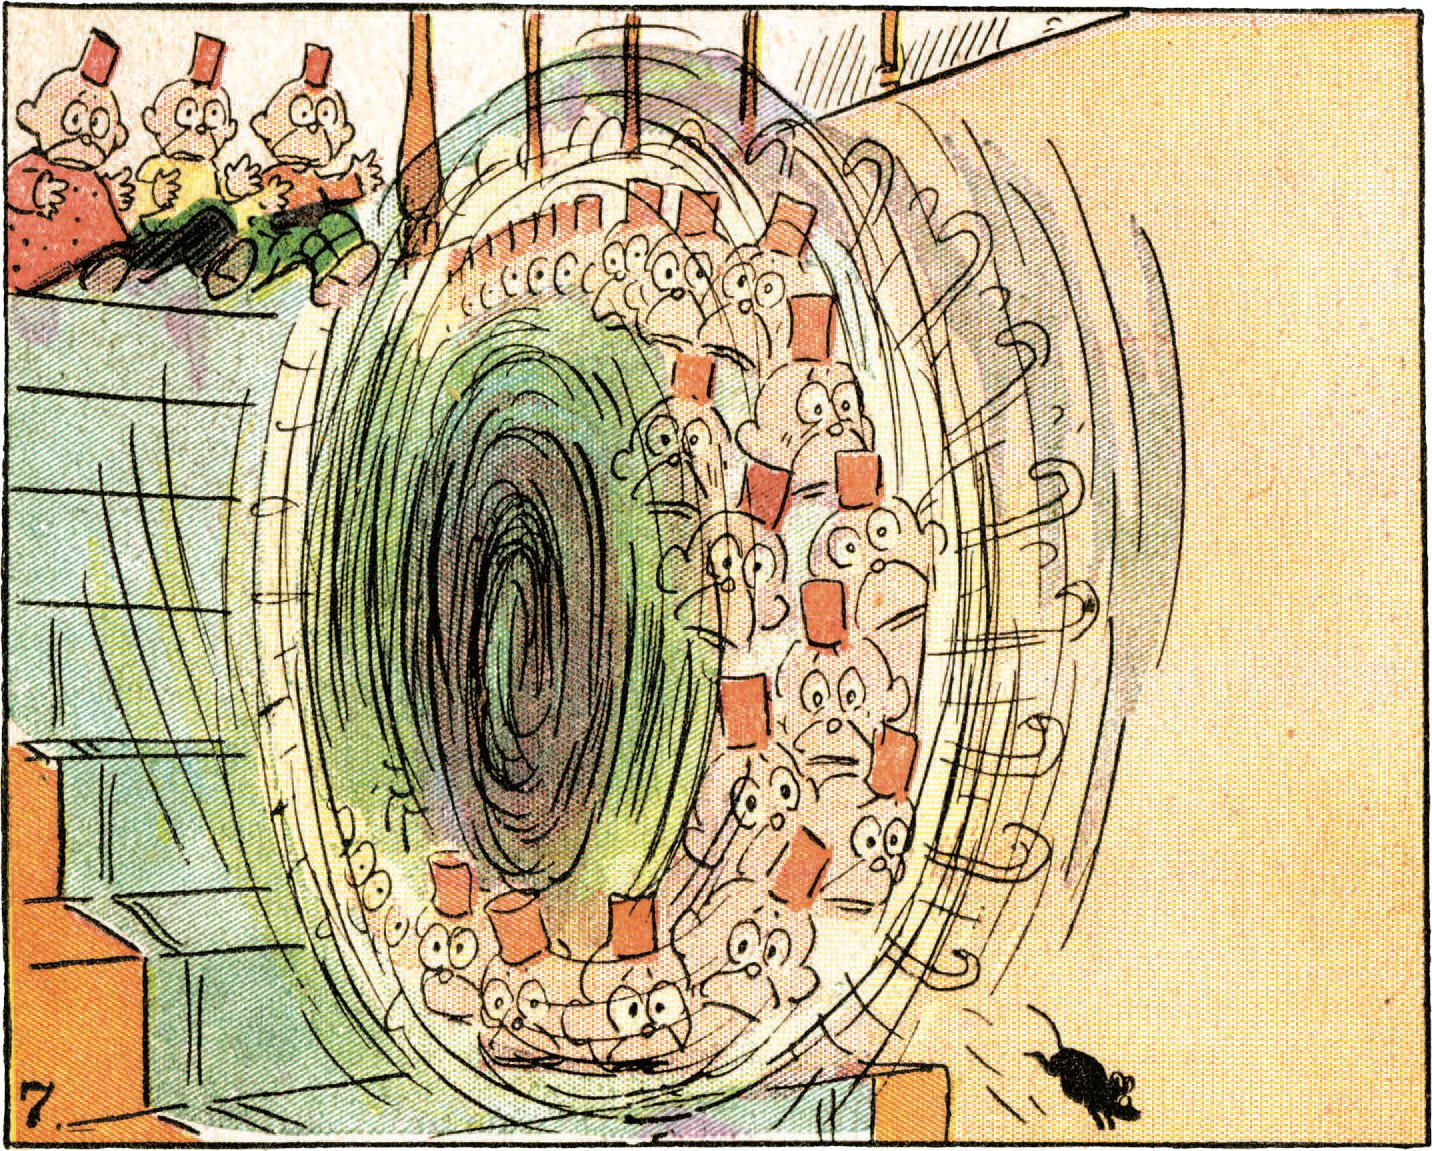 A panel from Happy Hooligan by Frederick Burr Opper